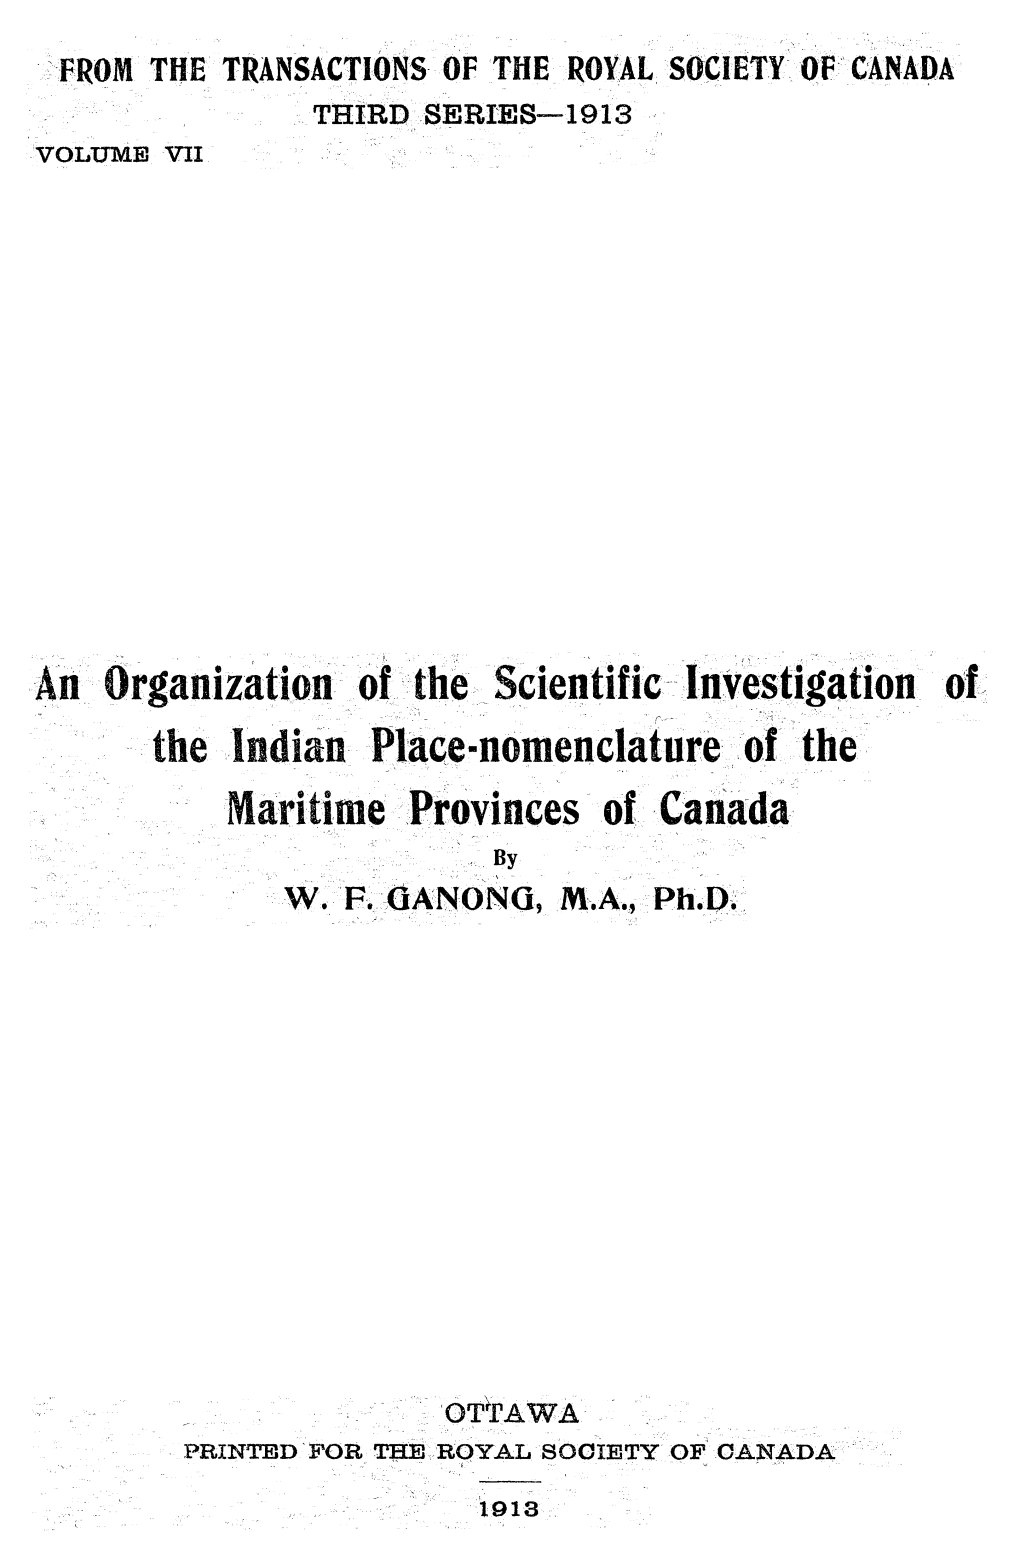 An Organization of the Scientific Investigation of the Indian Place-Nomenclature of the Maritime Provinces of Canada by W